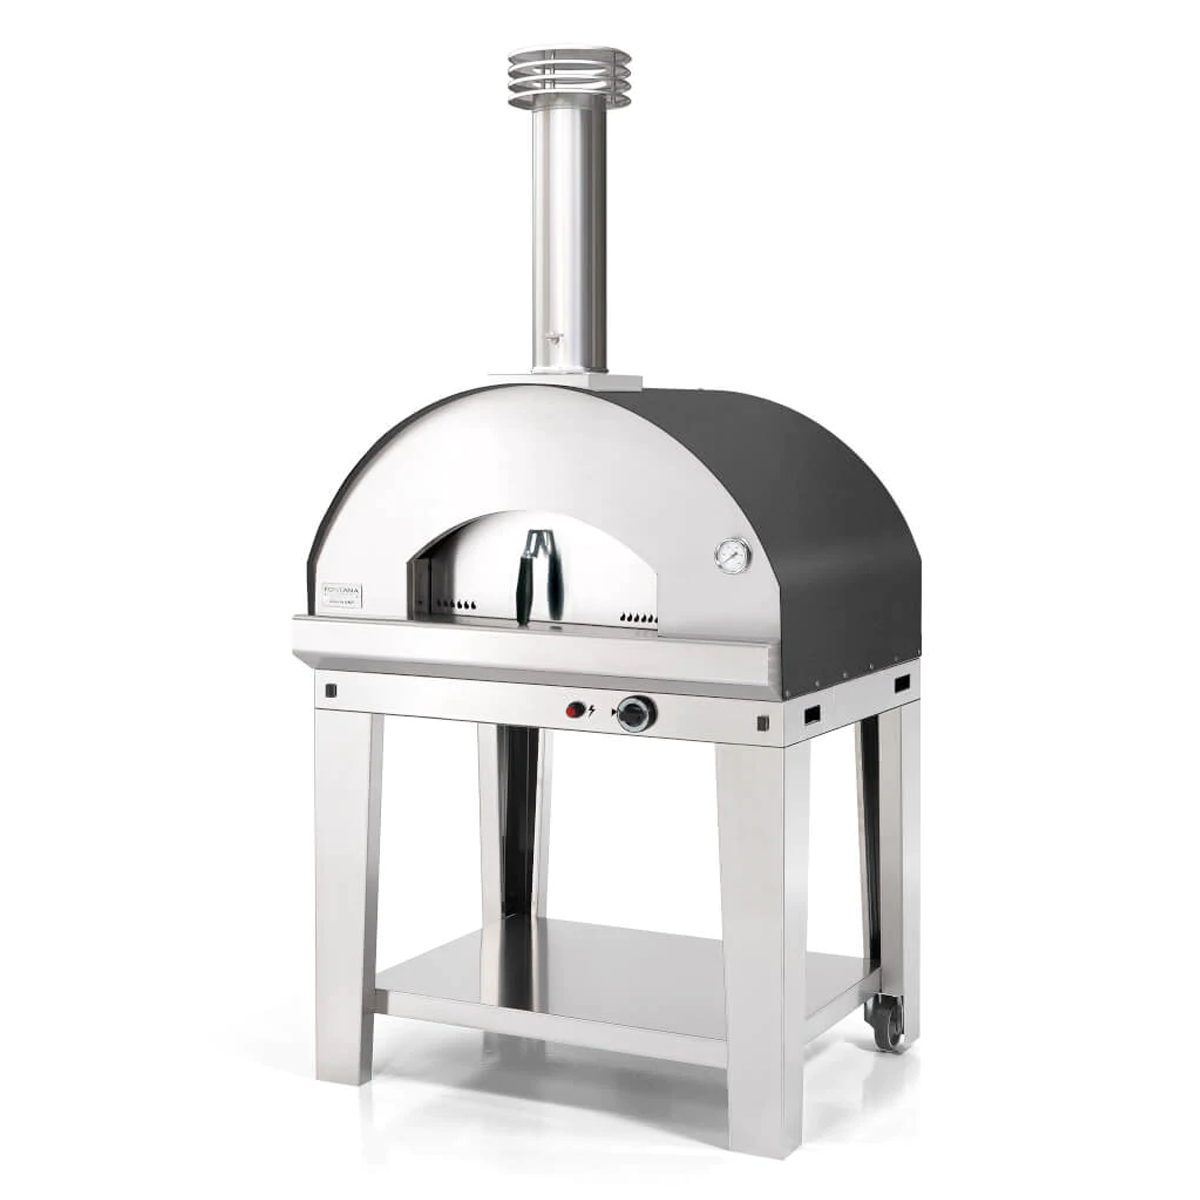 The Mangiafuoco Home Gas Pizza Oven